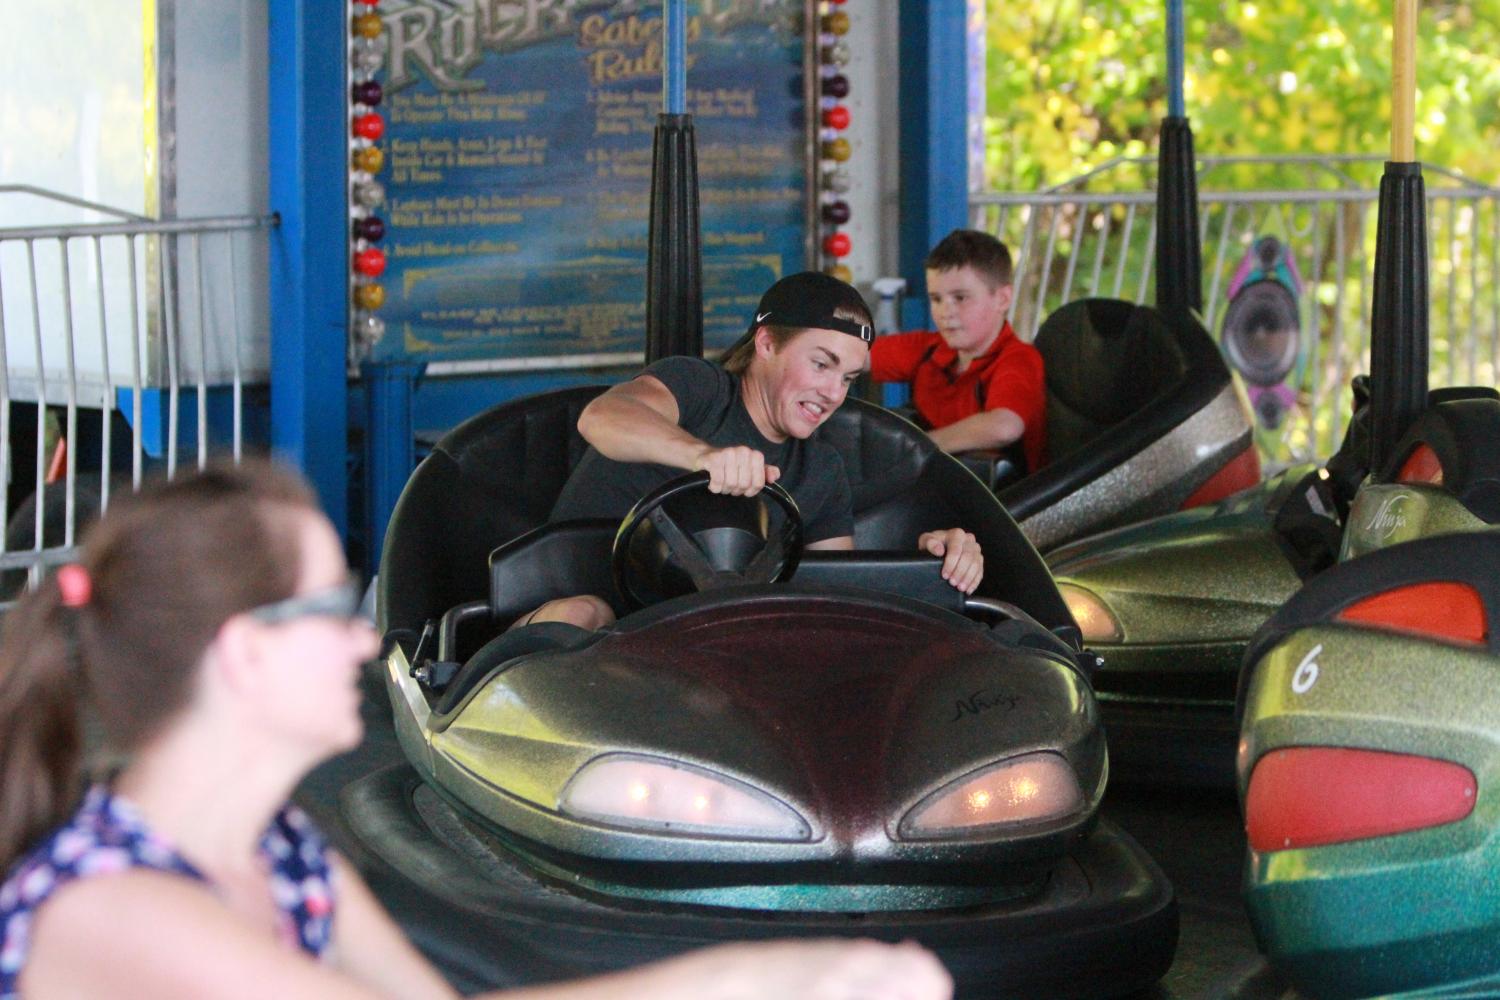 Taking a ride on the go-karts, sophomore Andrew Donar attends Applefest on Sunday.